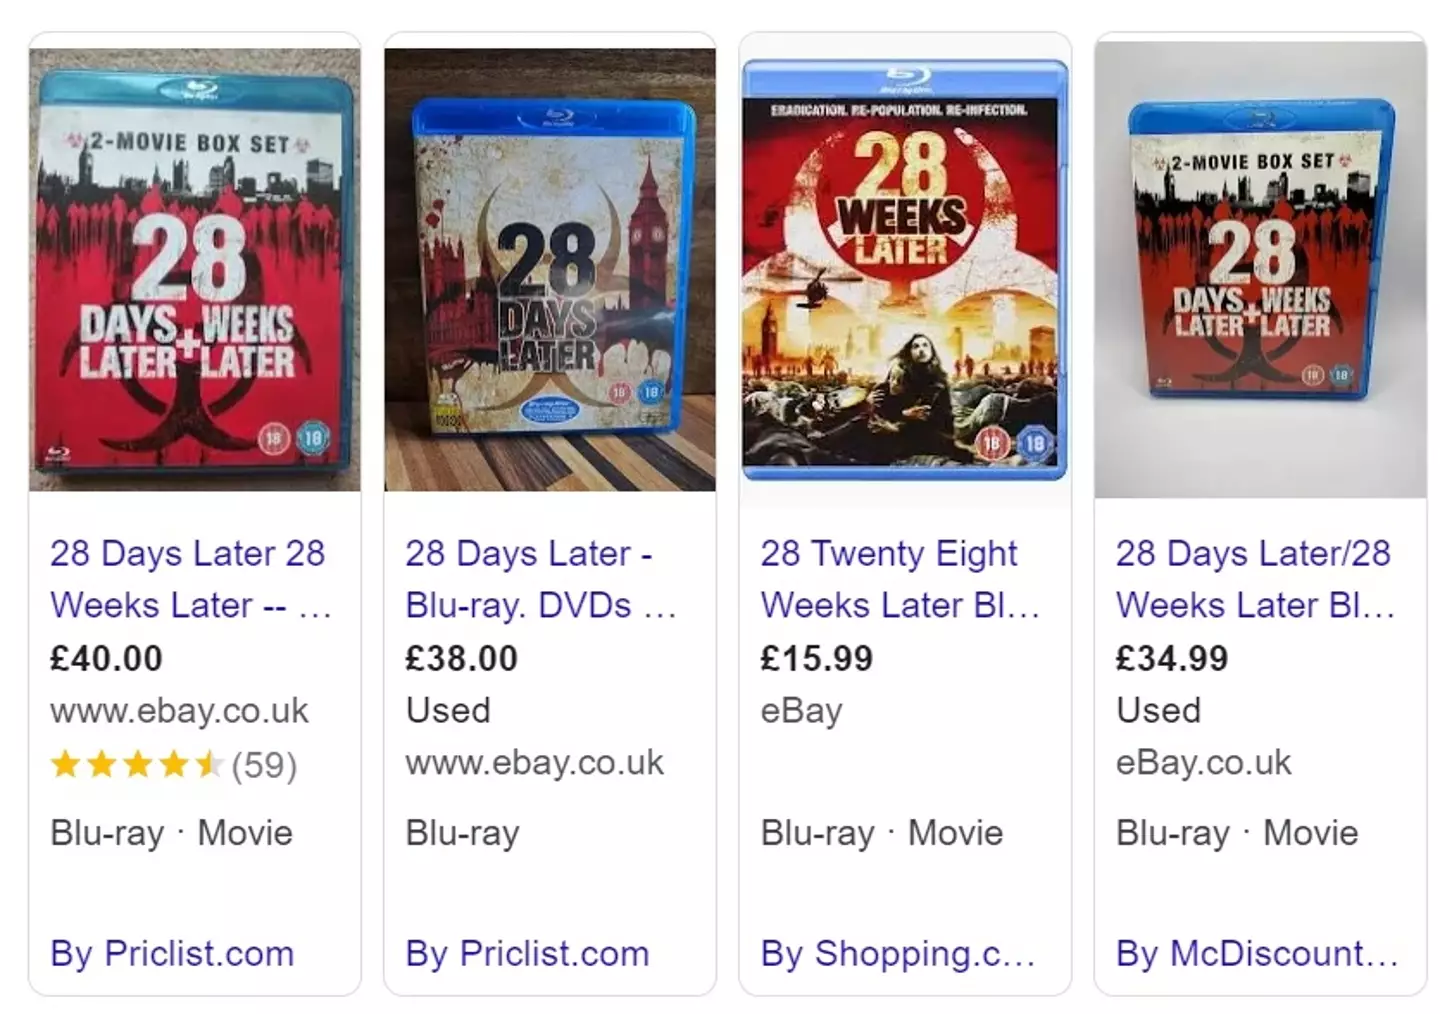 I hope you've been hoarding 28 Days Later Blu-Rays.